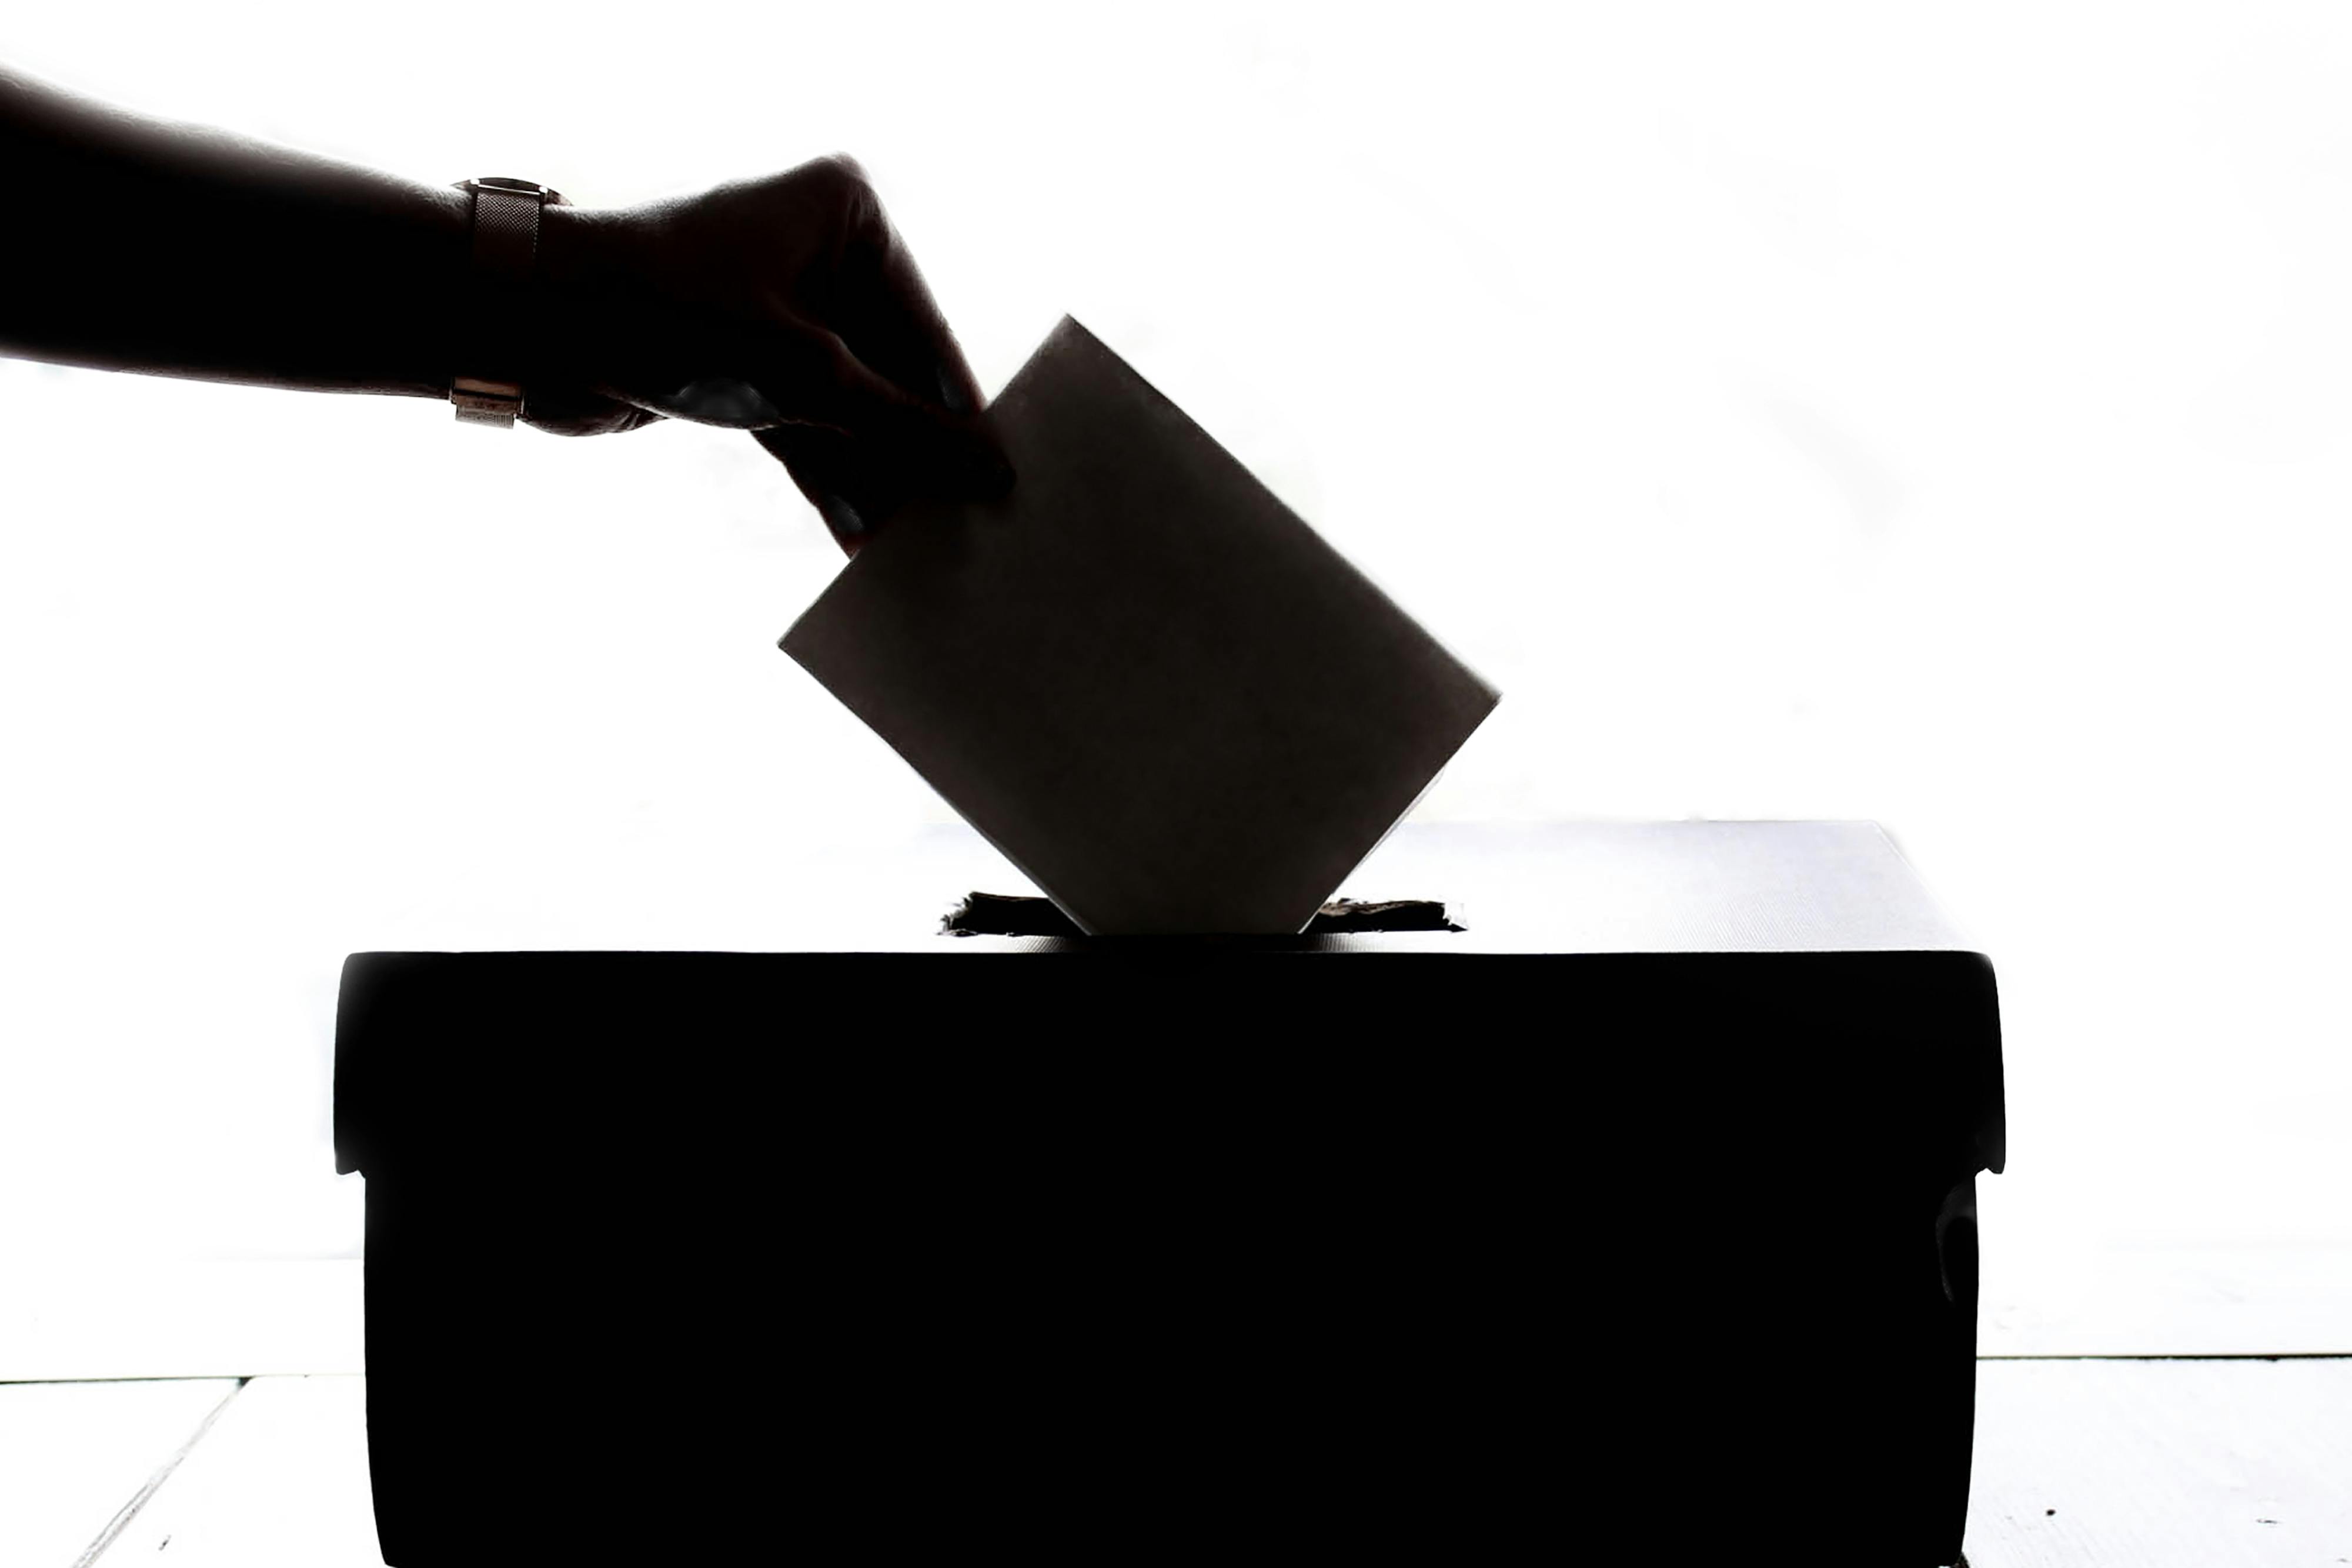 Election Photos, Download The BEST Free Election Stock Photos & HD Images